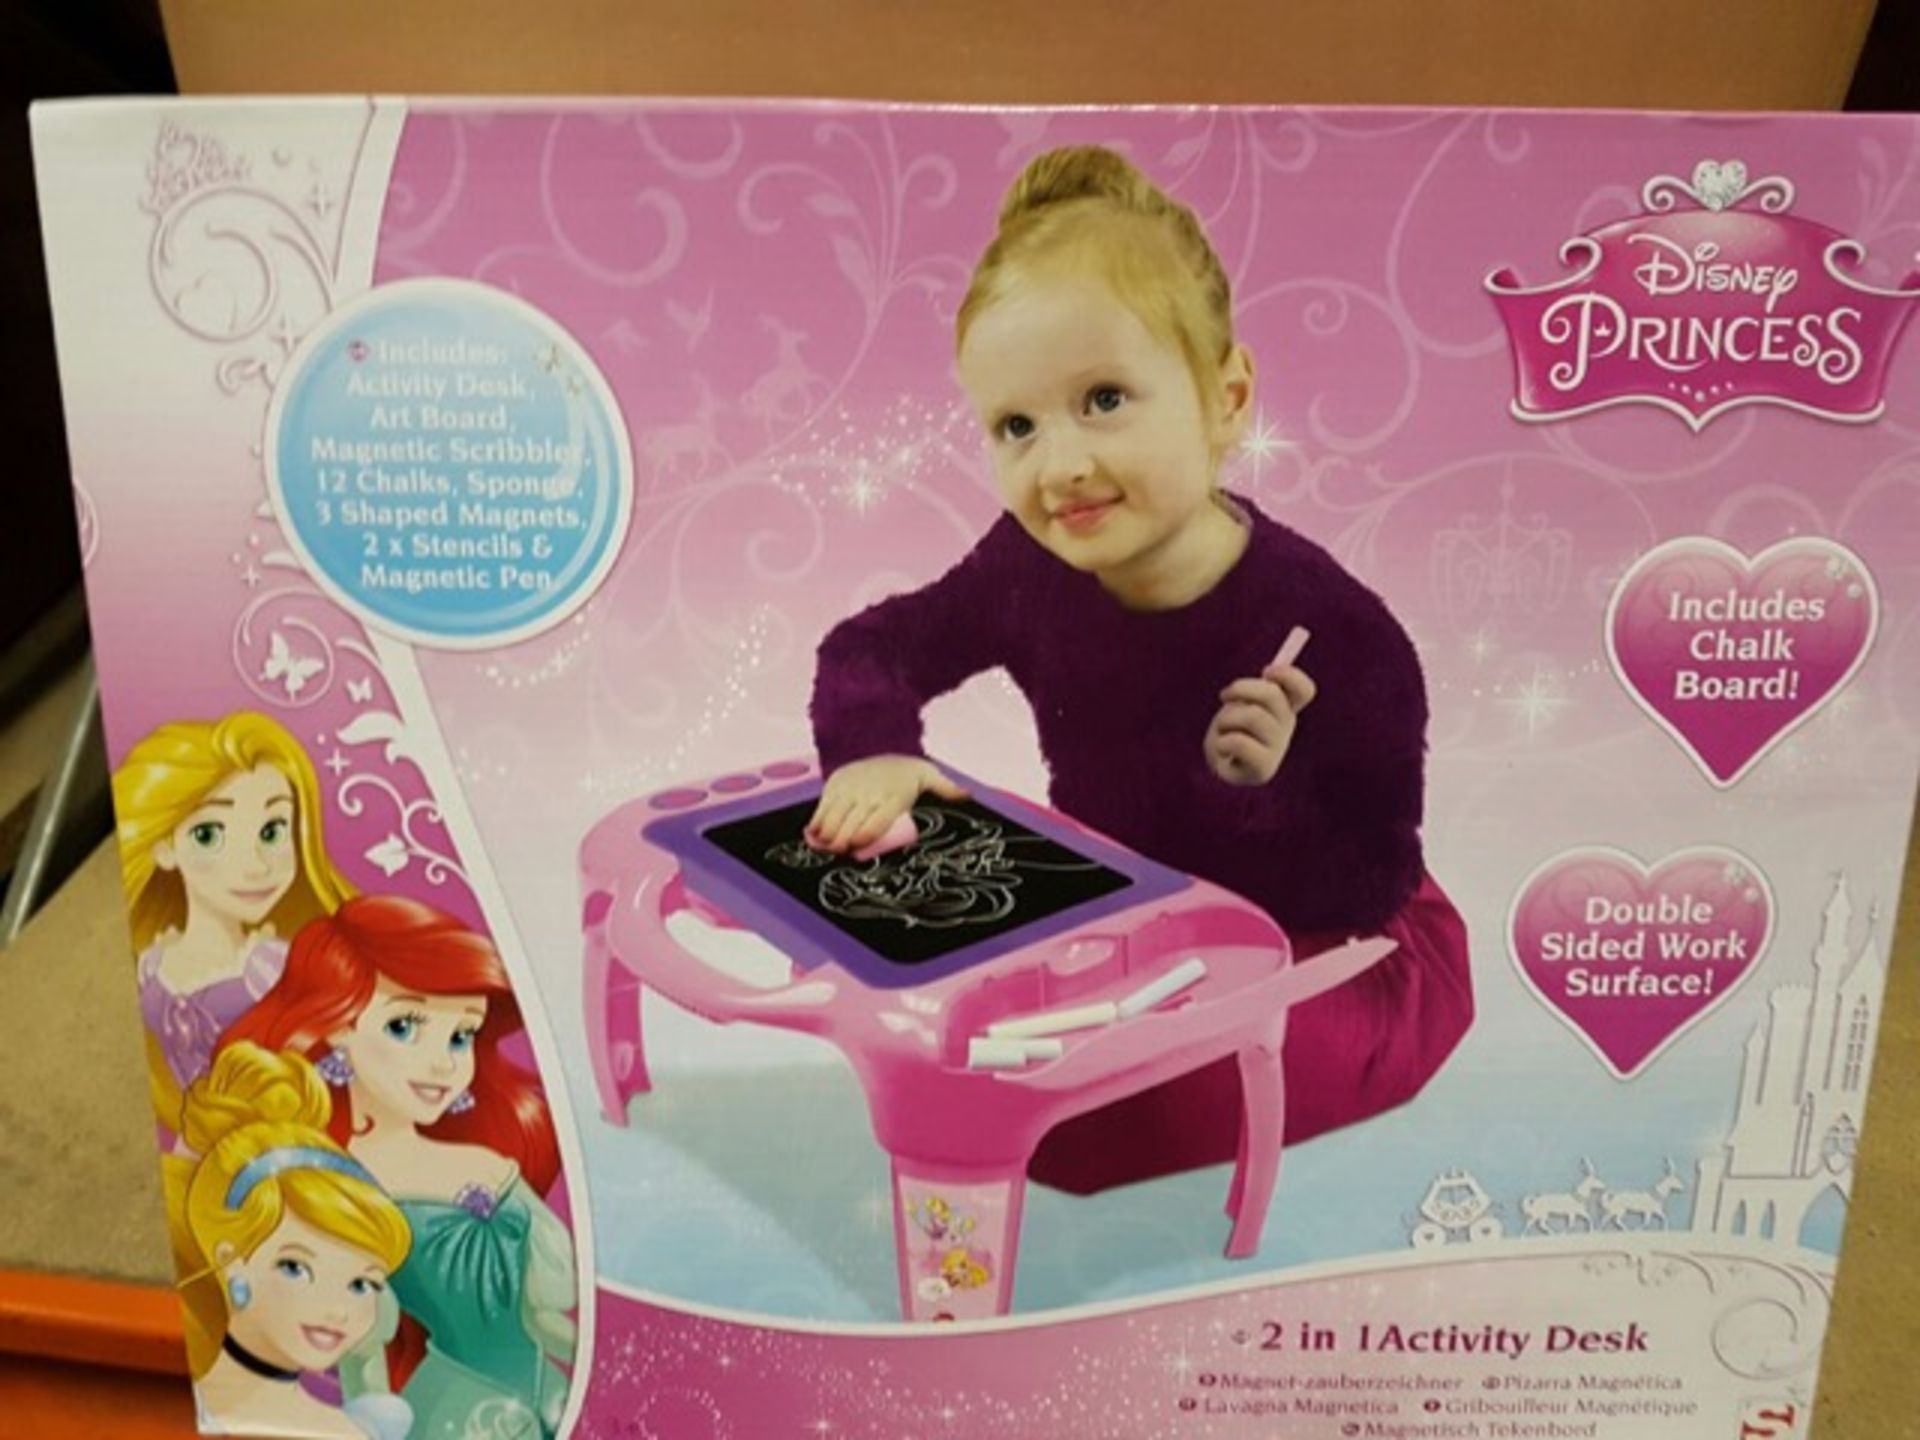 12 x Brand New Disney Princess 2 in 1 Activity Desks. Includes chalk board, double sided work